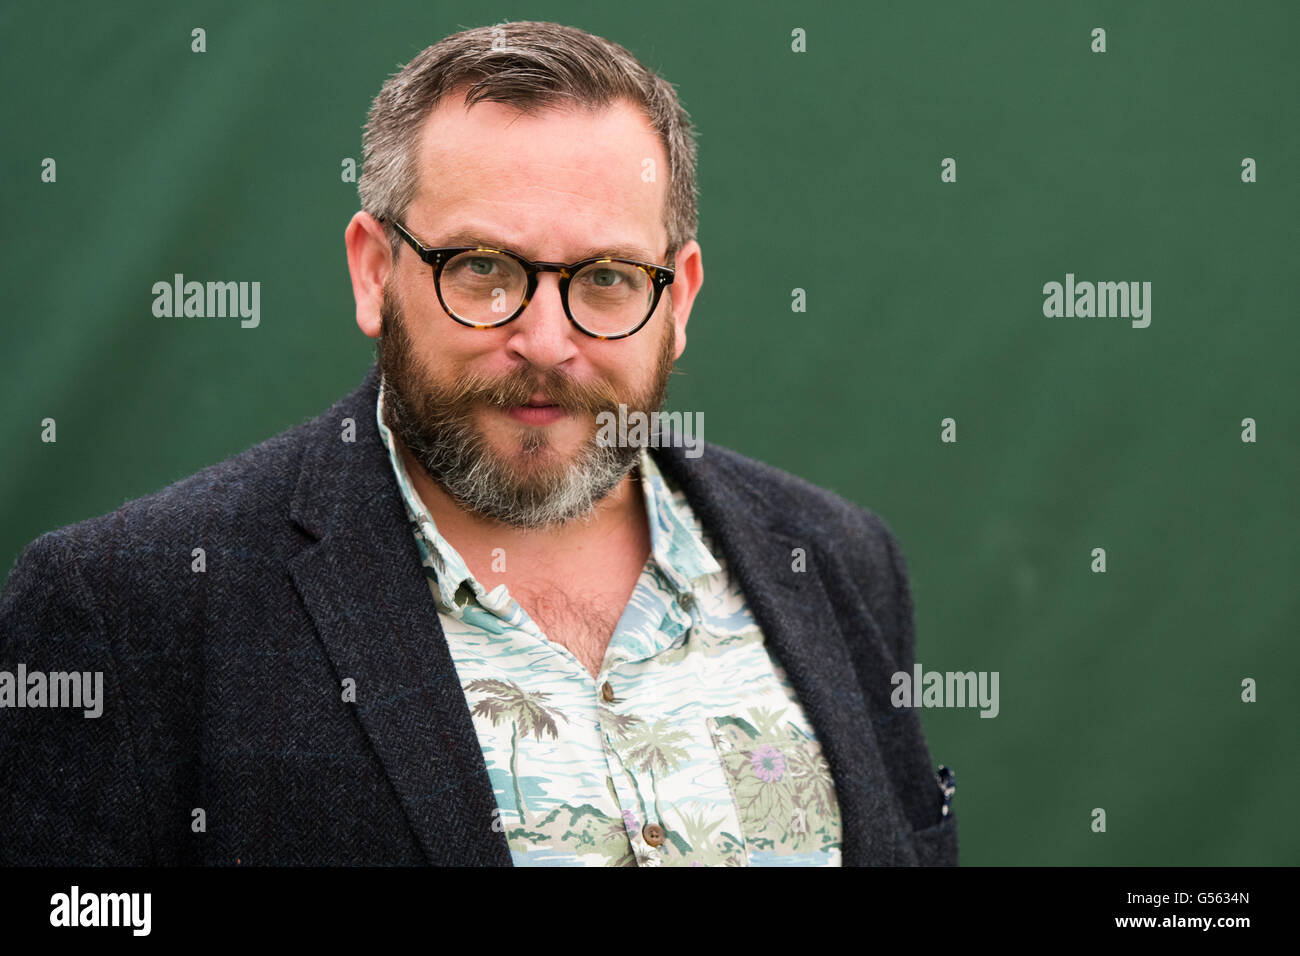 Gary Northfield, British comic artist and writer, most famous for his comic character, Derek the Sheep published in DC Thomson's The Beano and BeanoMAX The Hay Festival of Literature and the Arts, Hay on Wye, Powys, Wales UK, June 01 2016 Stock Photo